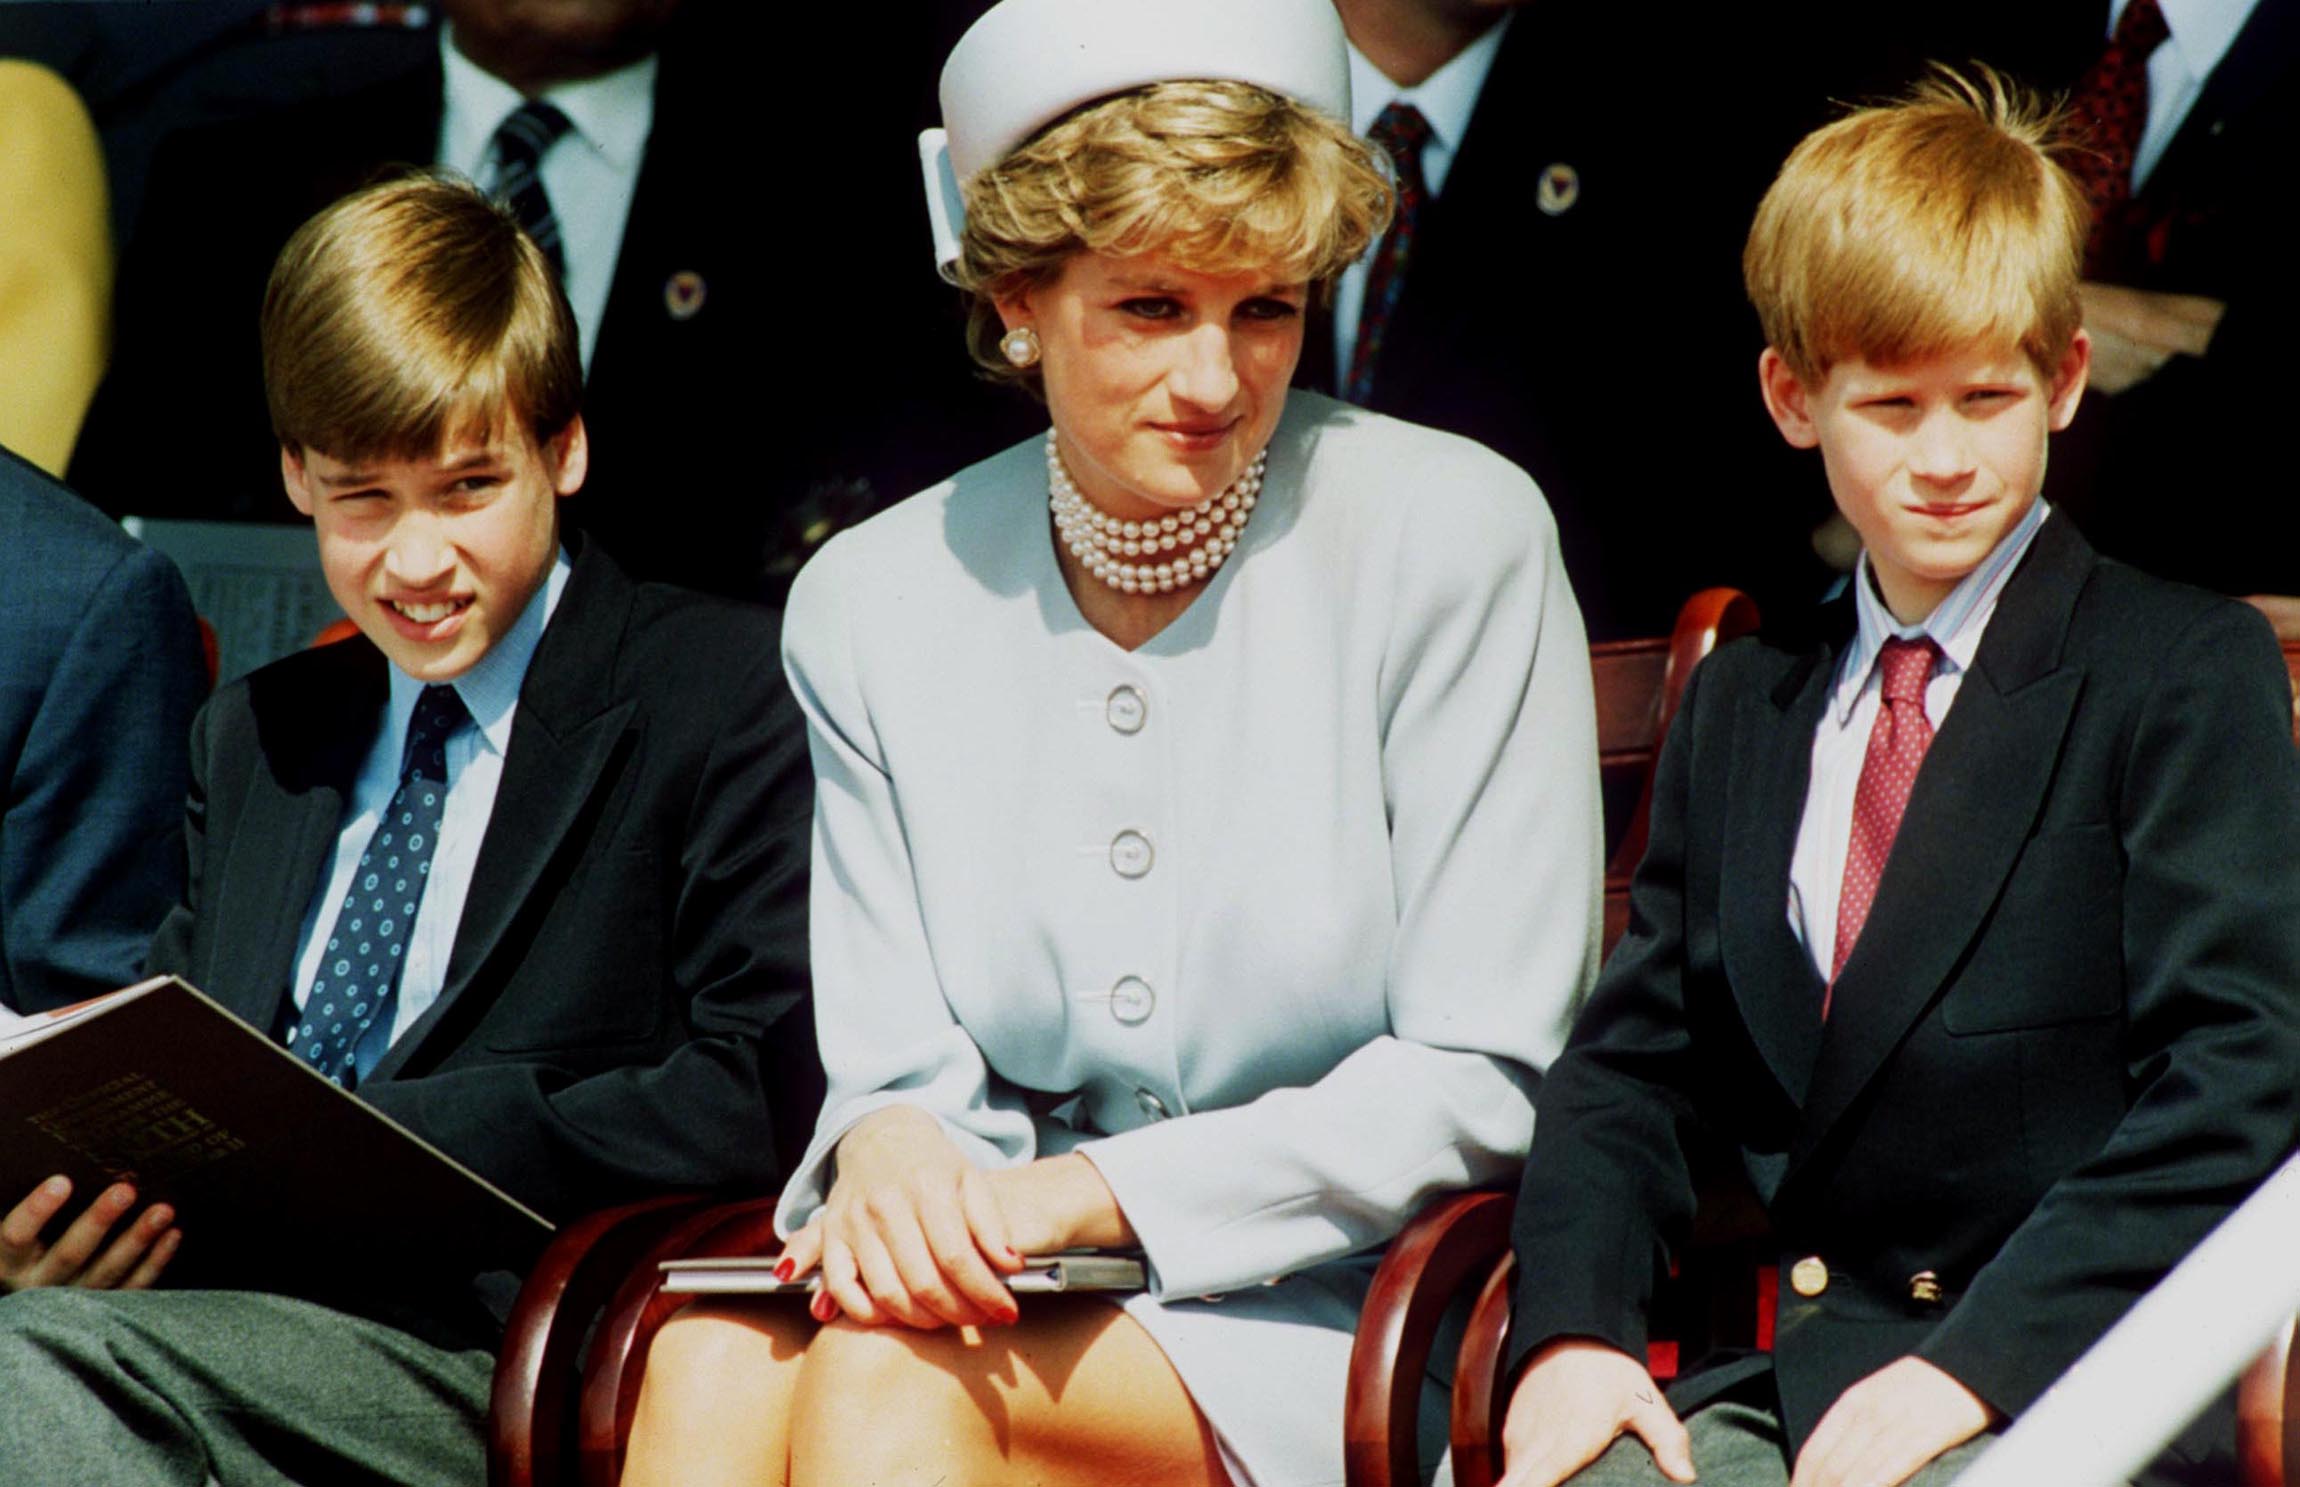 Princess Diana, Princess of Wales with her sons Prince William and Prince Harry attend the VE Heads of State Memorial Service at Hyde Park on May 7, 1995 in London, England.  |  Source: Getty Images